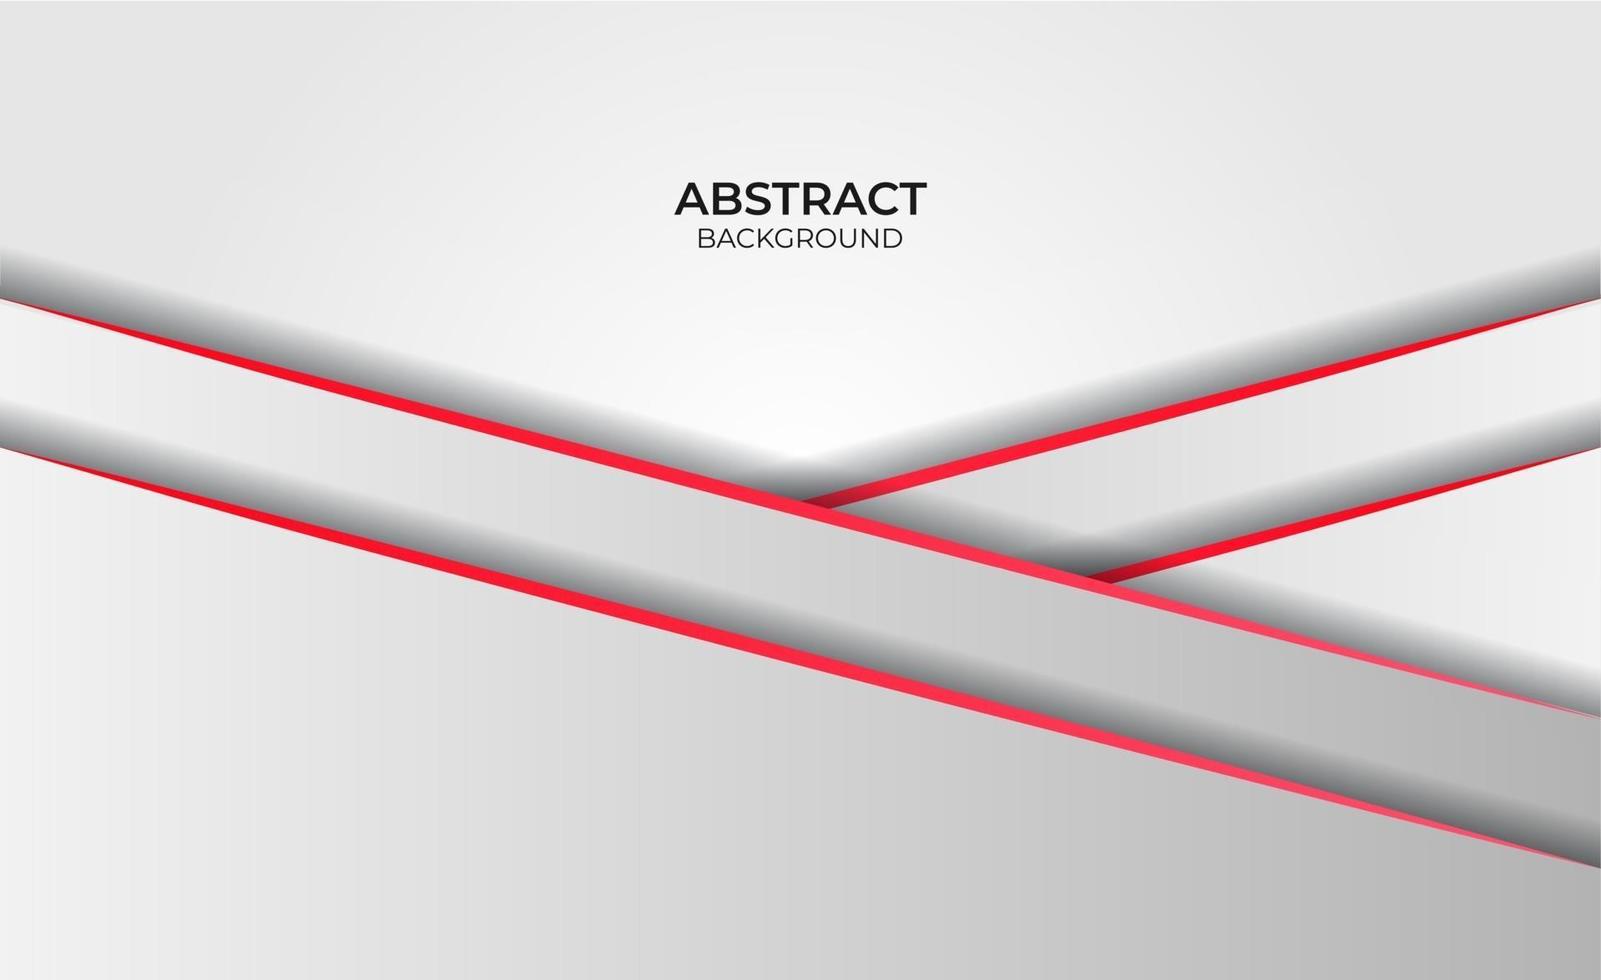 Background Abstract Style Design Red And White vector